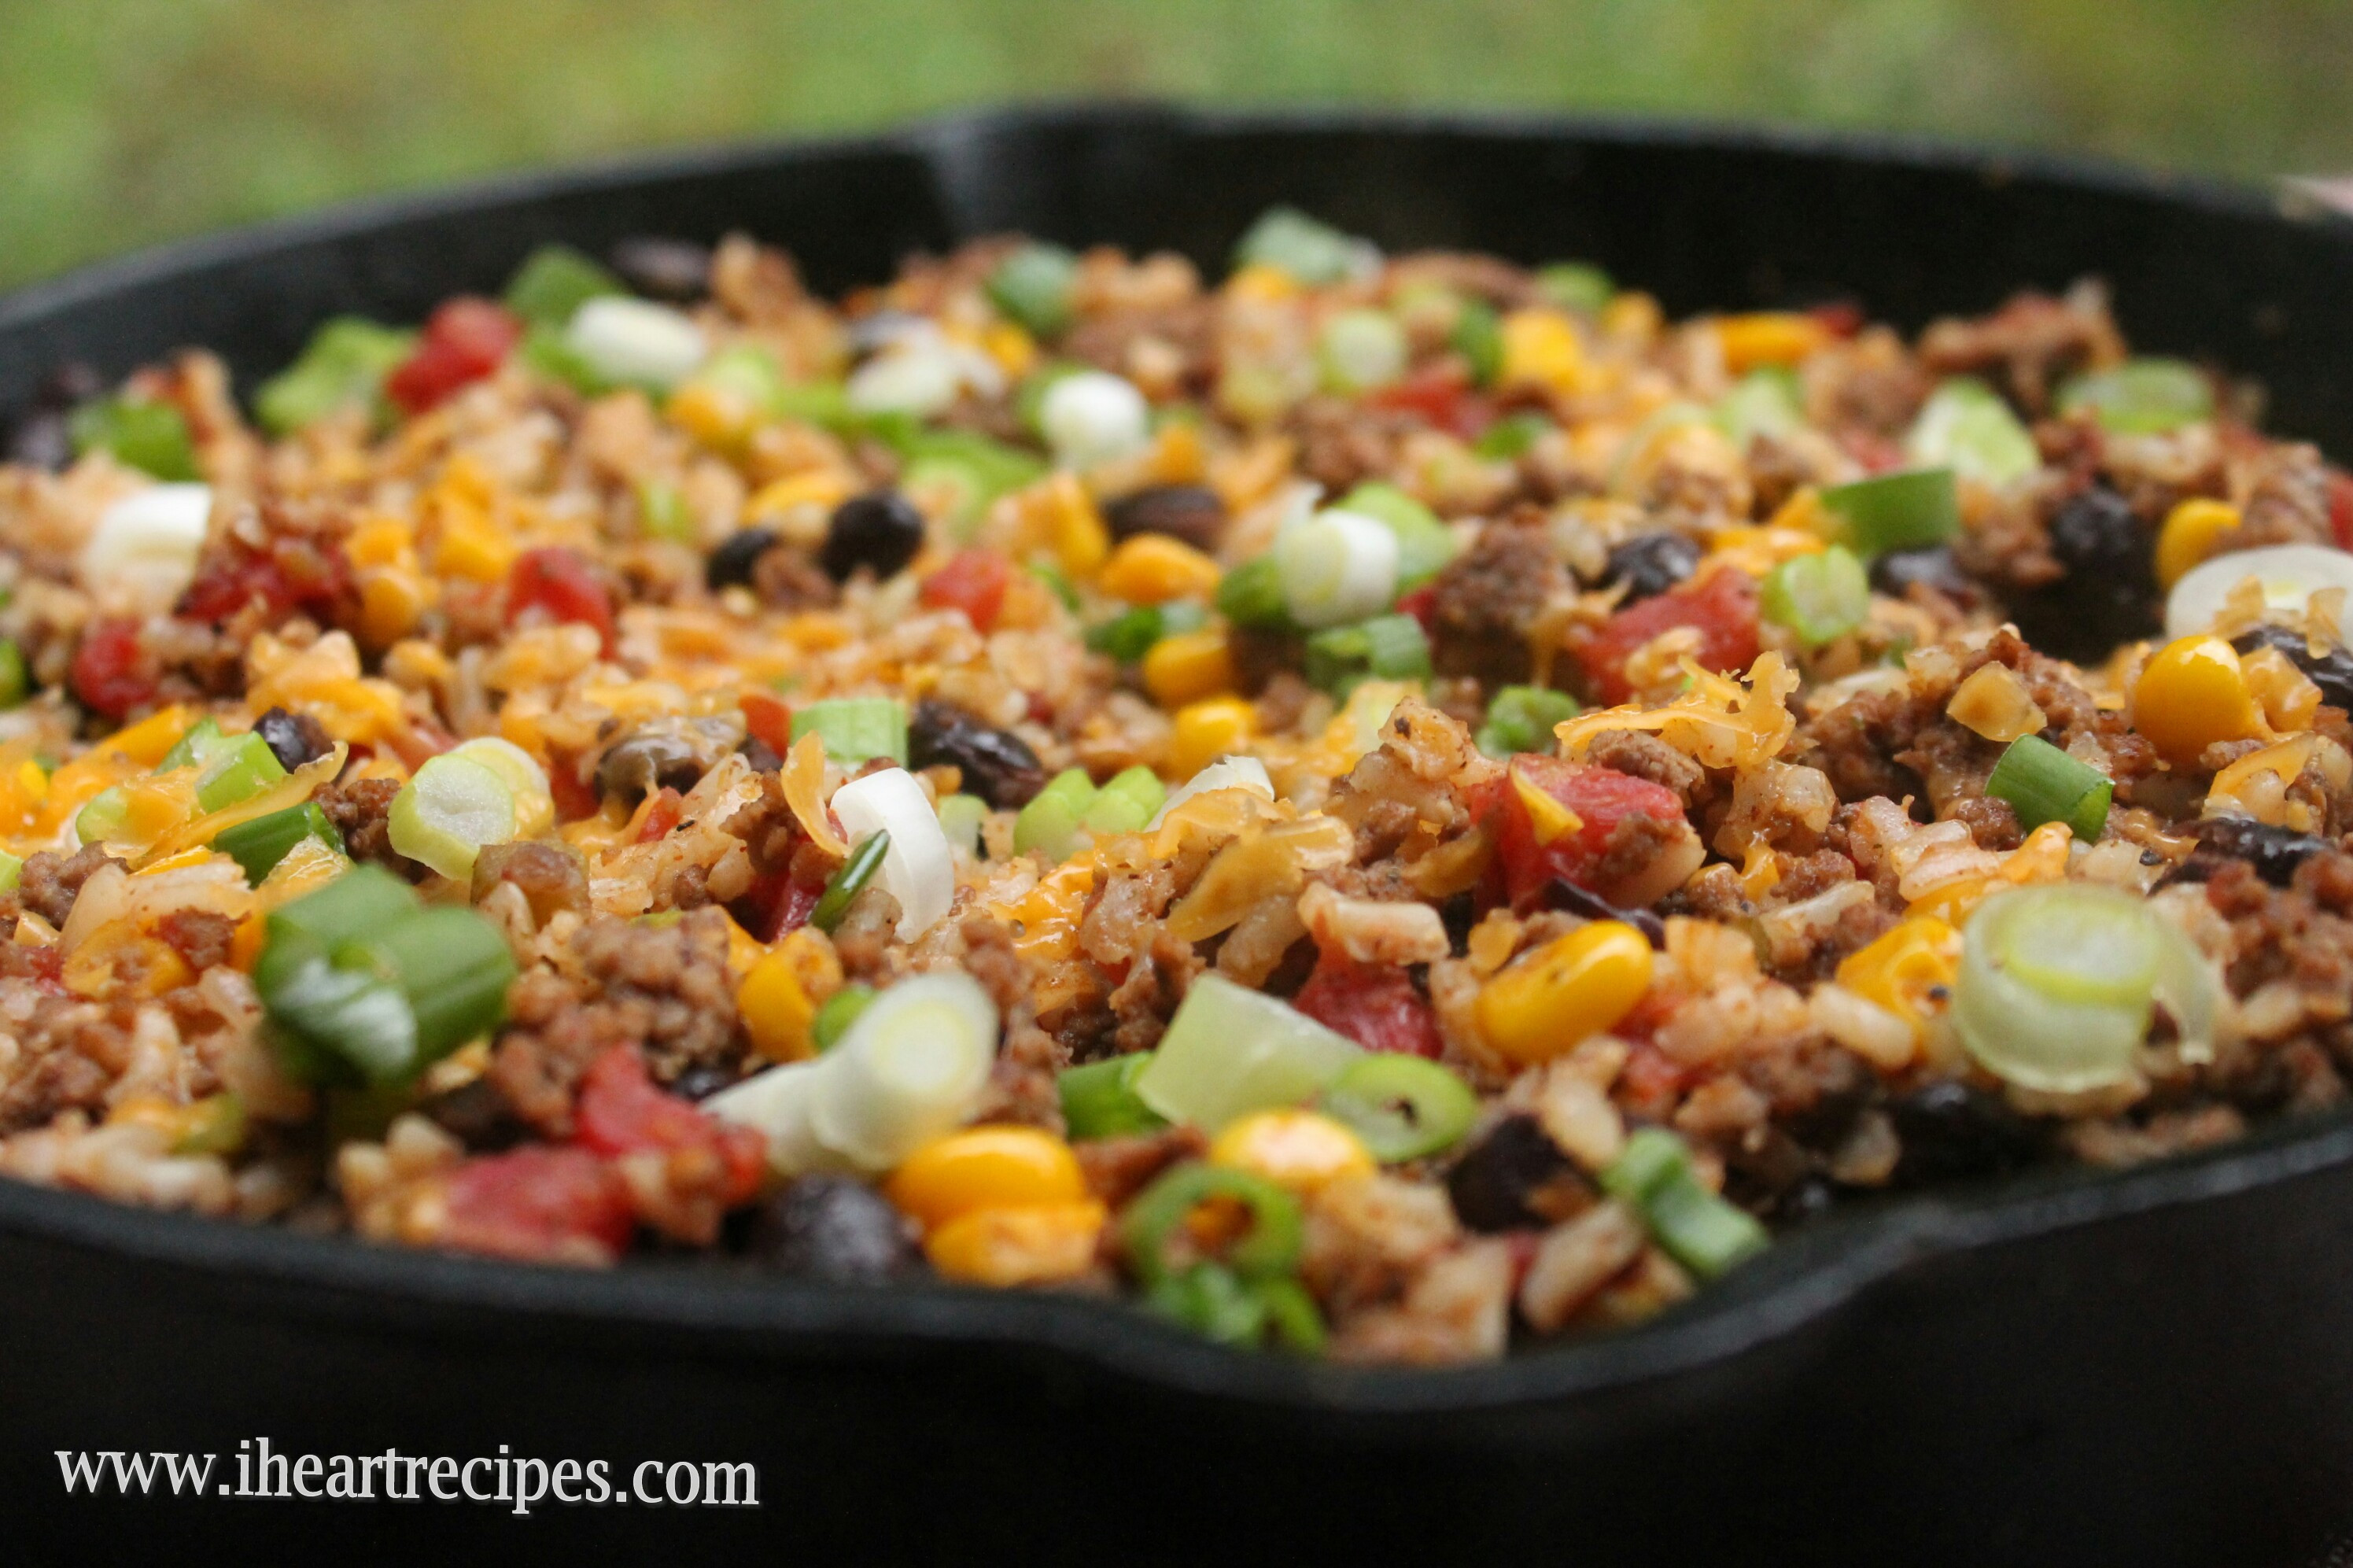 Recipes Using Ground Beef
 Tex Mex Beef Skillet